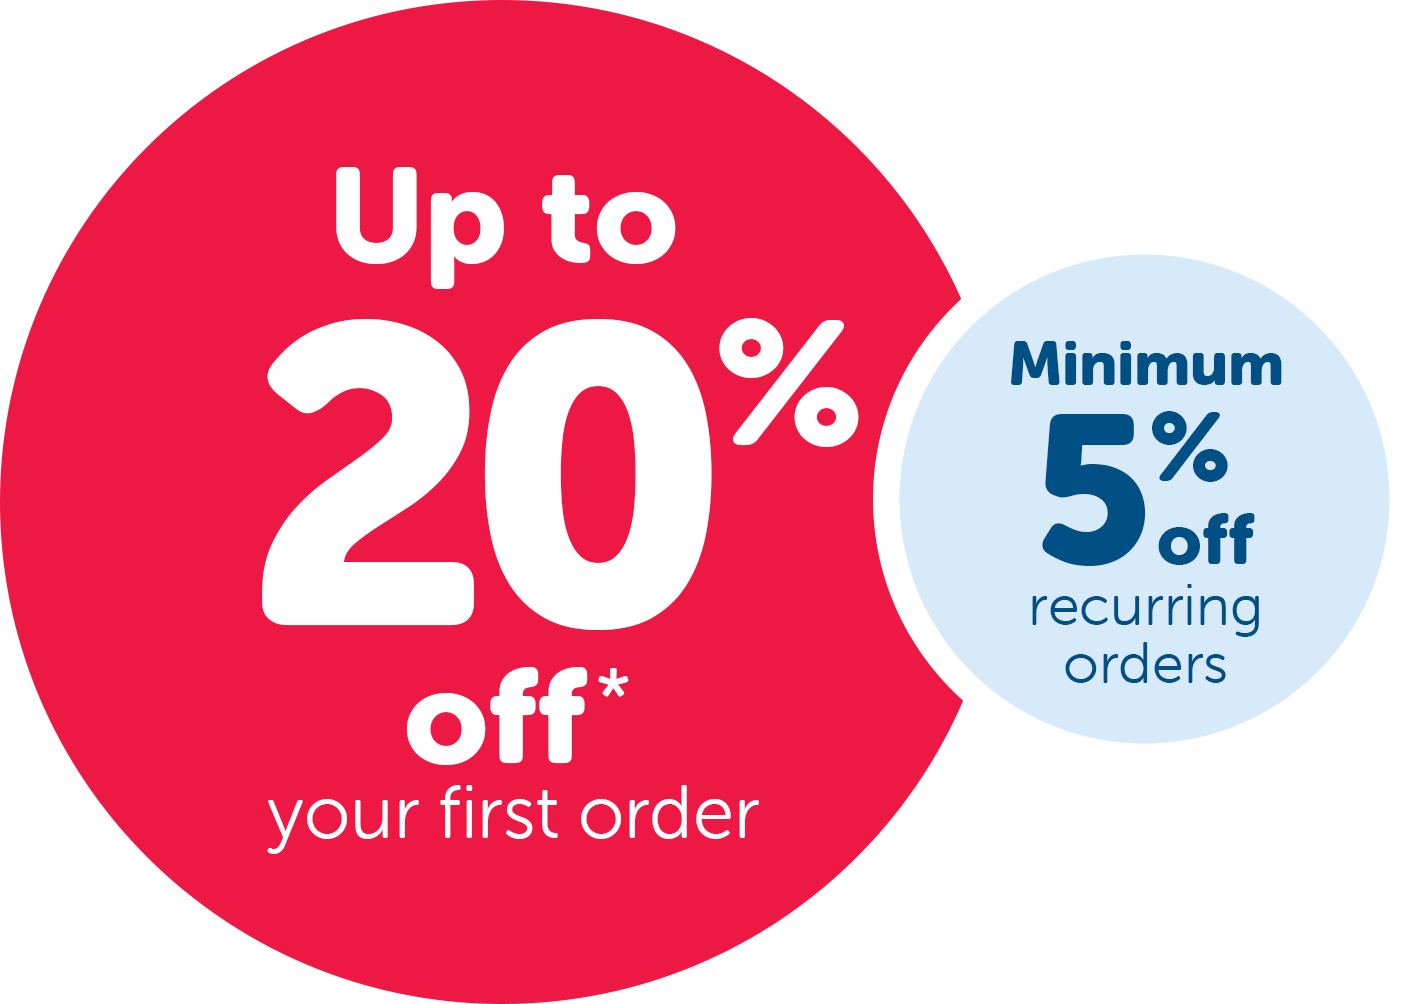 Save up to 20% with Autoship! - minimum of 5% off all recurring orders